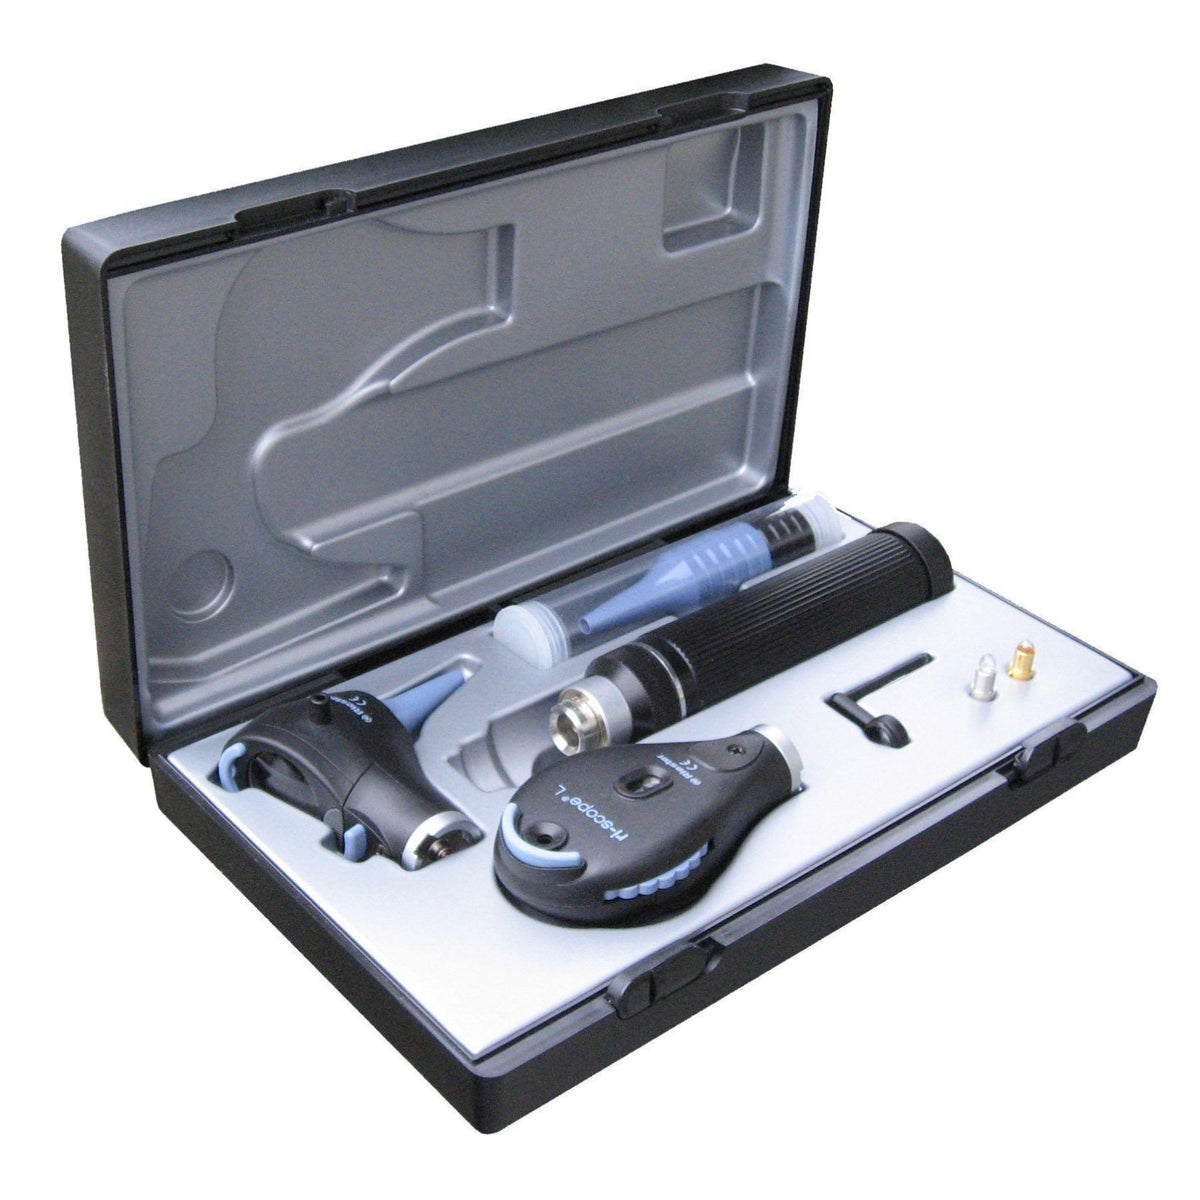 Riester Ri-Scope L Otoscope / Ophthalmoscope L3/L2 LED 3.5 V C Handle for 2 x Lithium Batteries